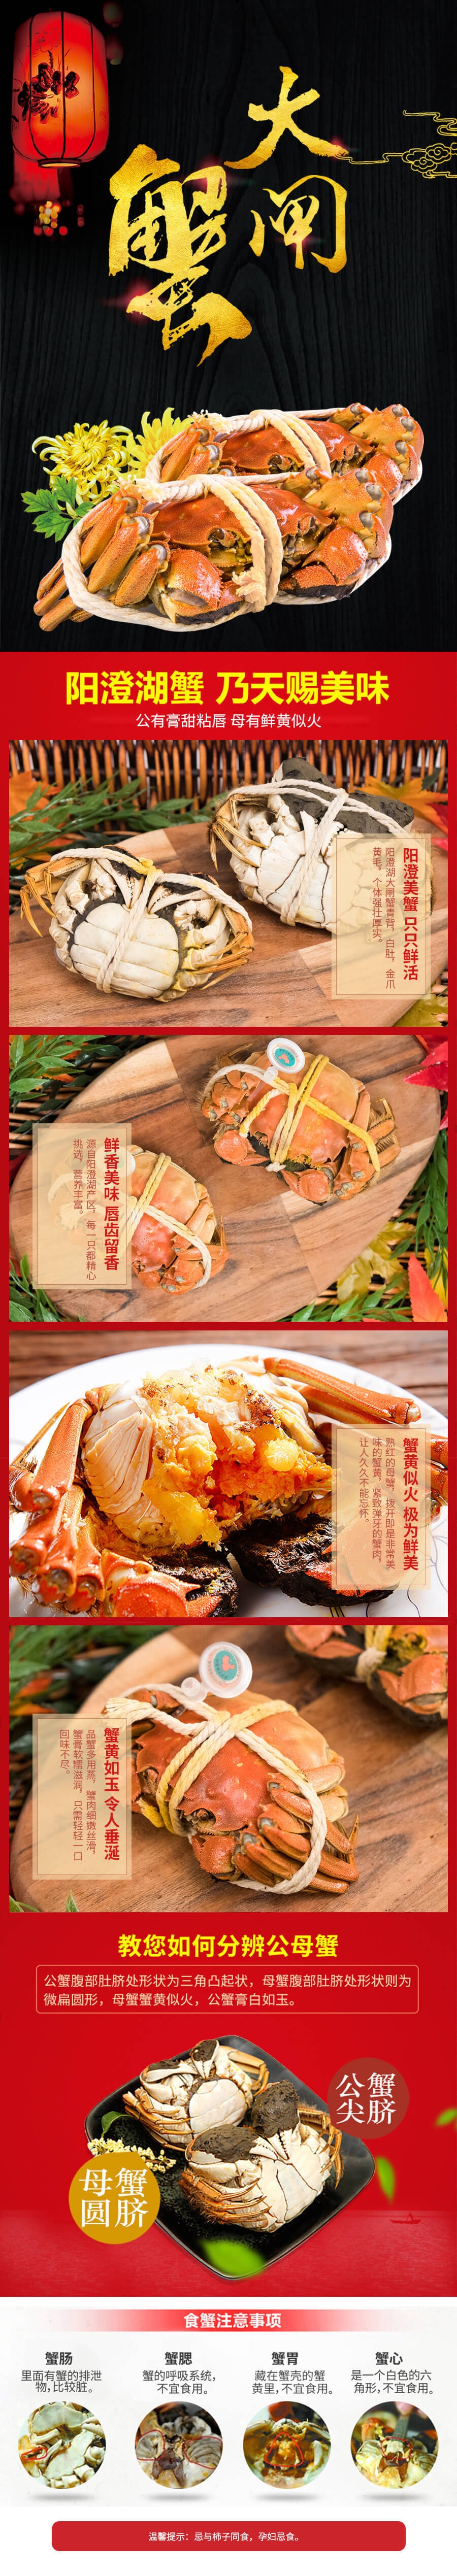 [LA Pick-up] Qiu Yue Cooked Mitten Crab 1 Pair For Only $69.99